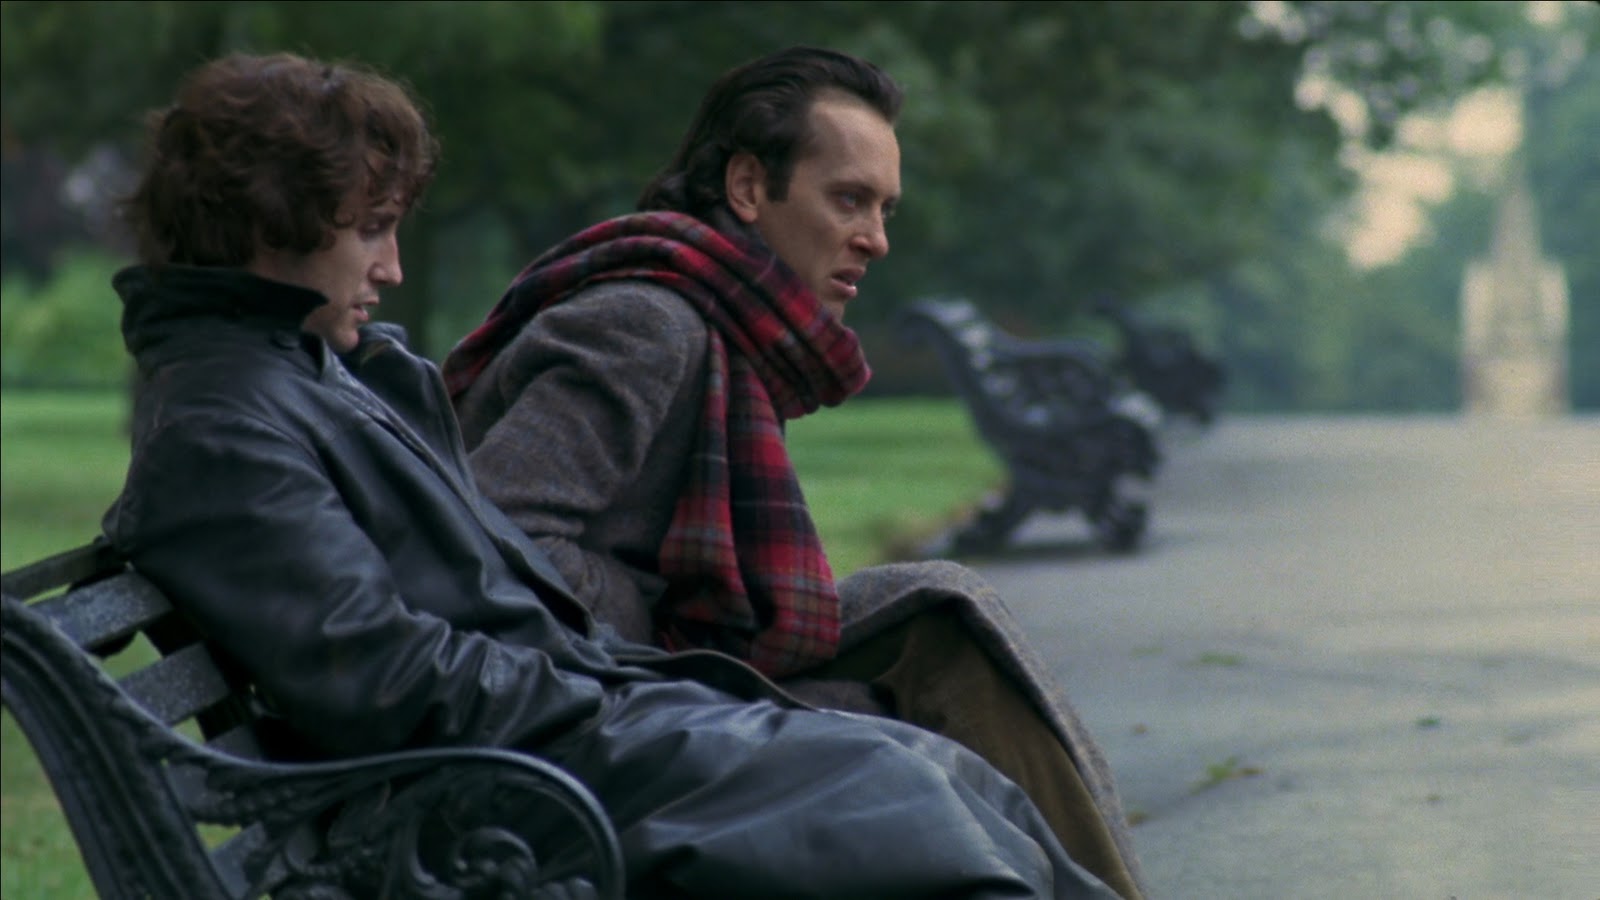 'Withnail & I' Gets Restored, Exploring 'All That Jazz,' Leonard Cohen in Cinema, and More